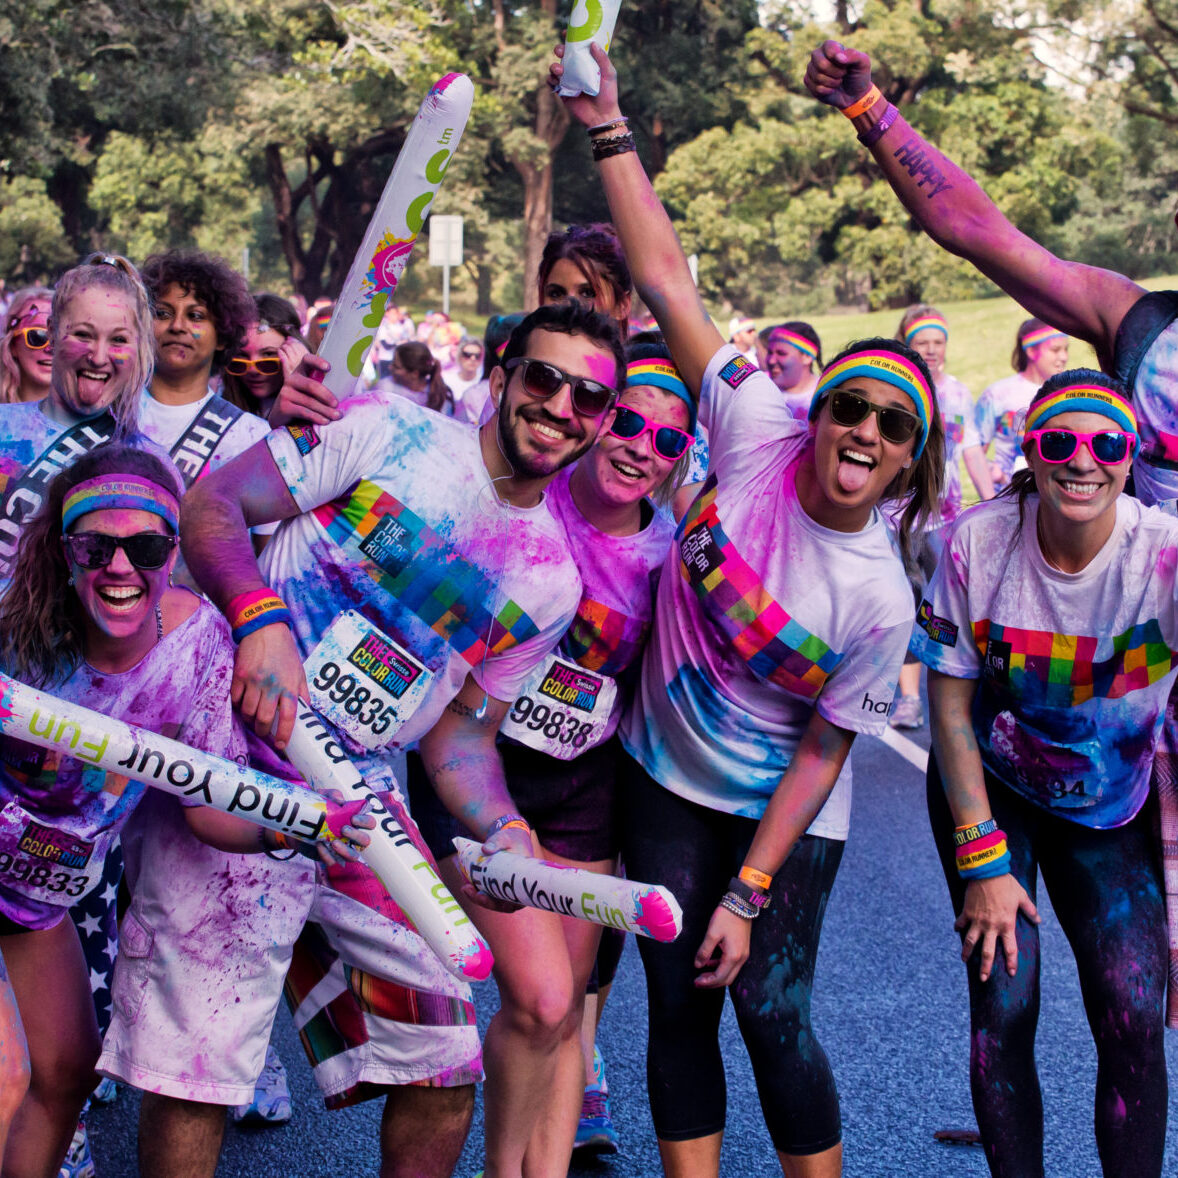 Sydney,Australia - August 24,2014: Competitors in the 'Color Run' fun run in Centennial Park. Runners are doused in coloured powder, bubbles and water as they run the 5K course.